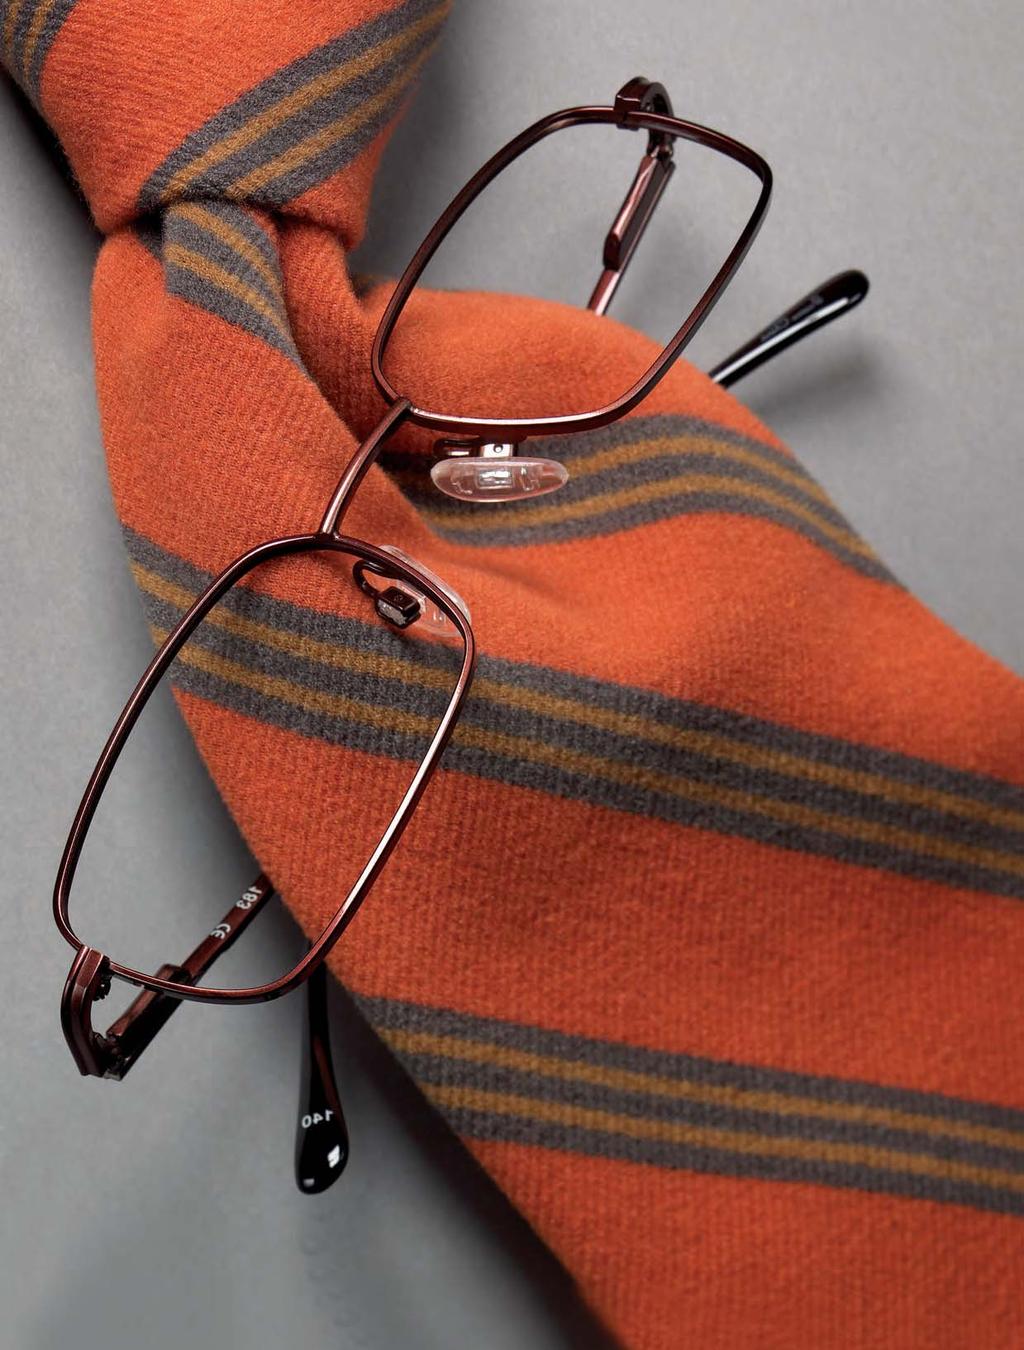 THE TIE HAS STYLE POWER TO MAKE THE LOOK. IT HAS BECOME A VITAL MEN S ACCESSORY. MEN S EYEWEAR HAS JOINED IN ITS RANKS AS A NECESSARY FASHION ELEMENT.